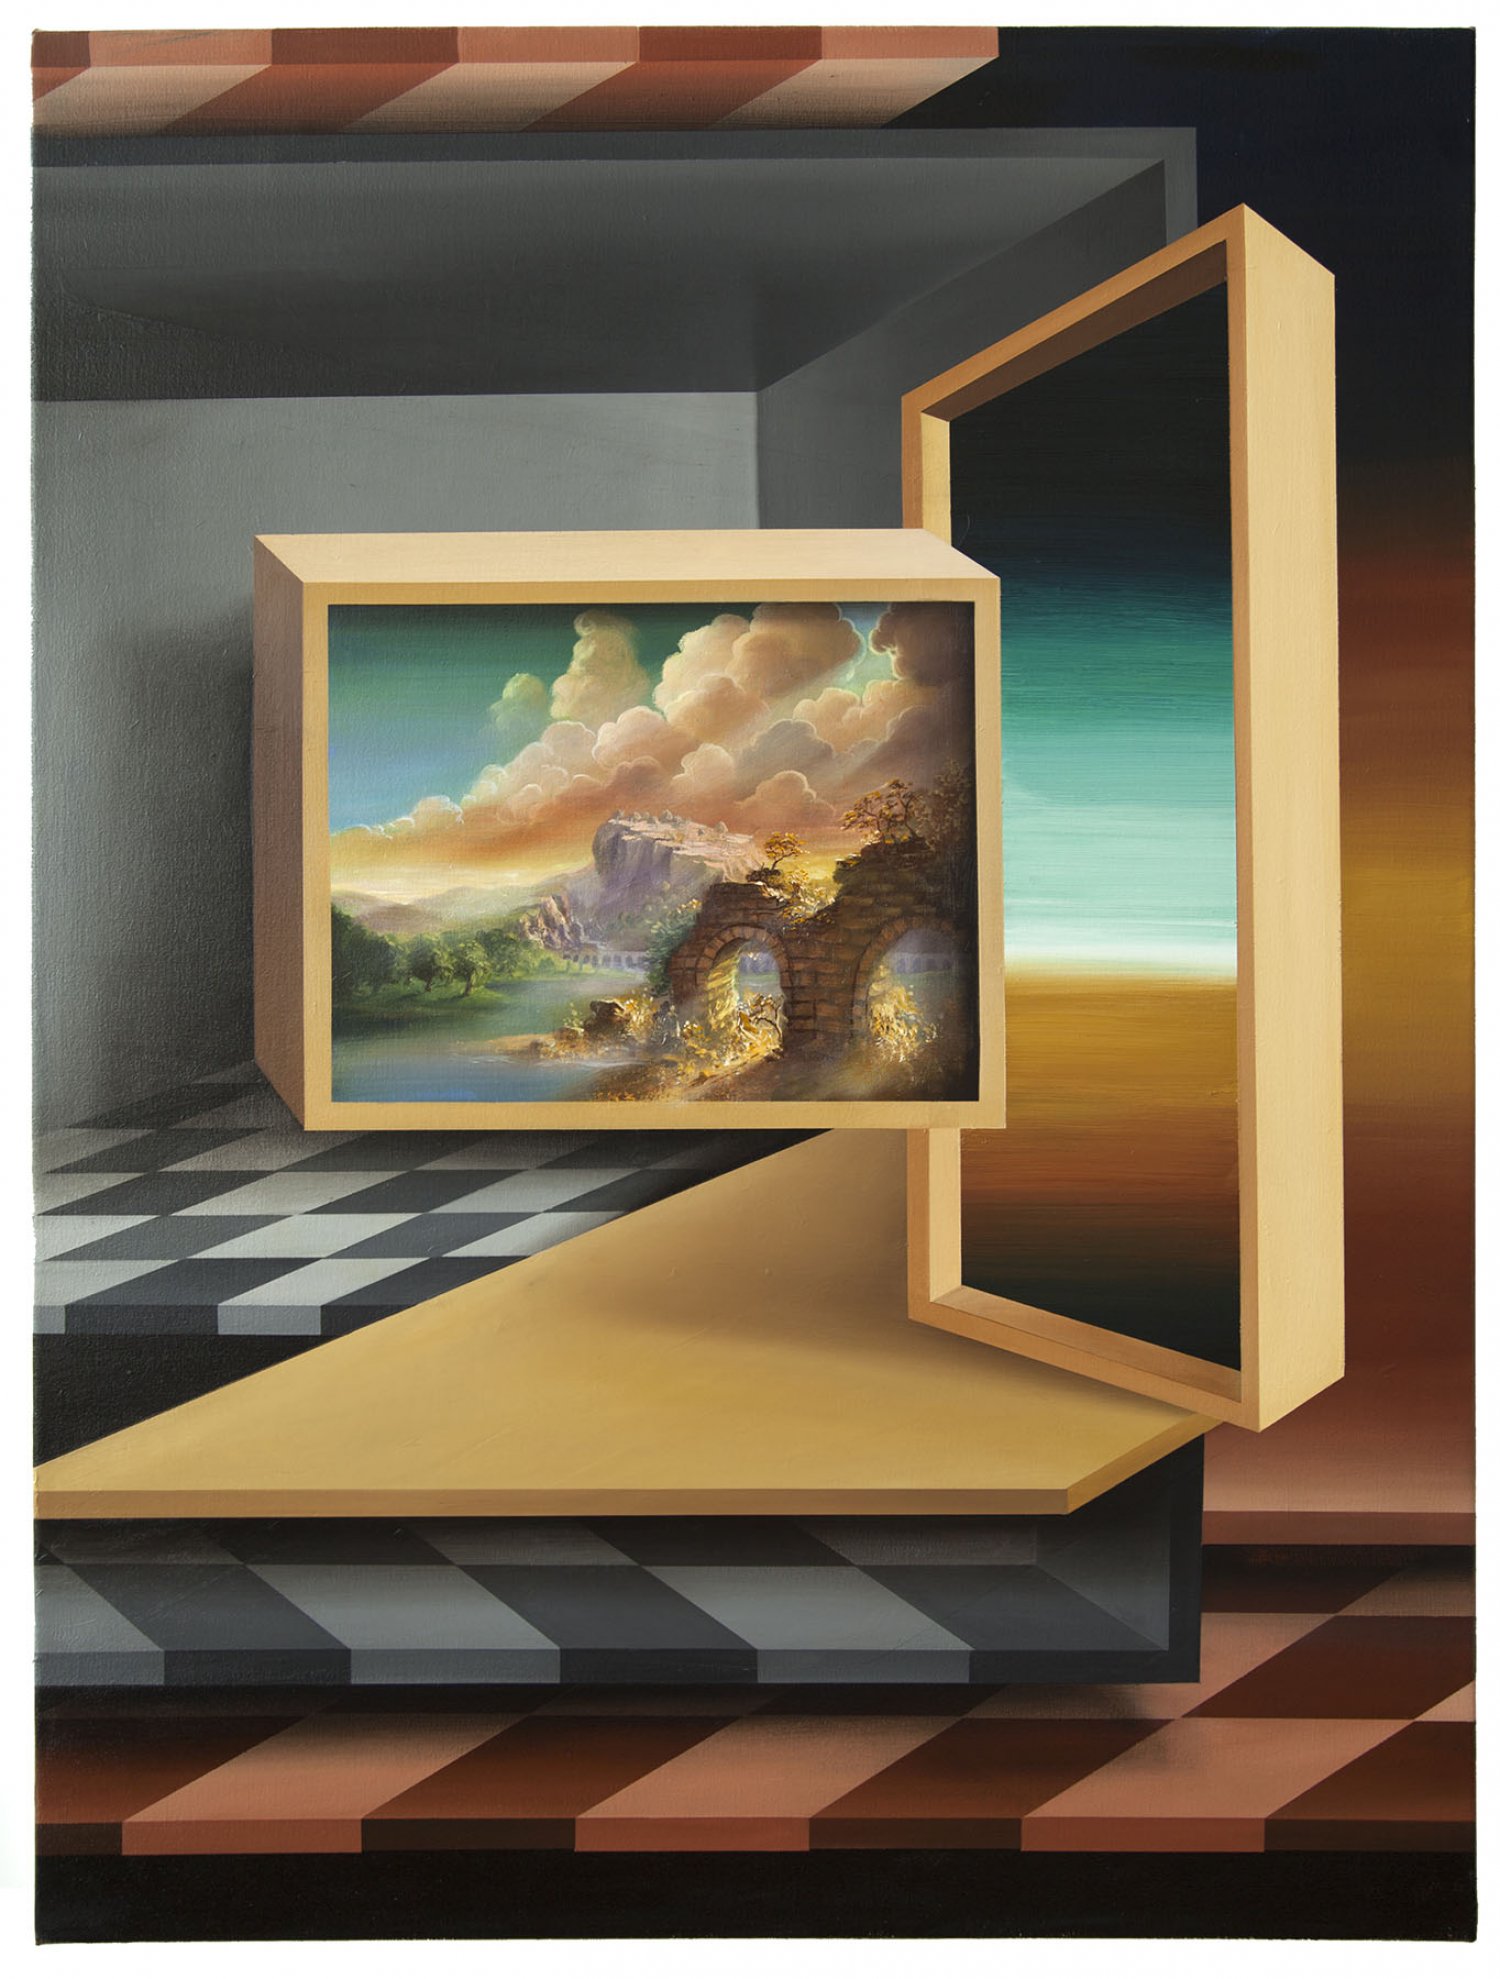 Peter Daverington, Room with a view